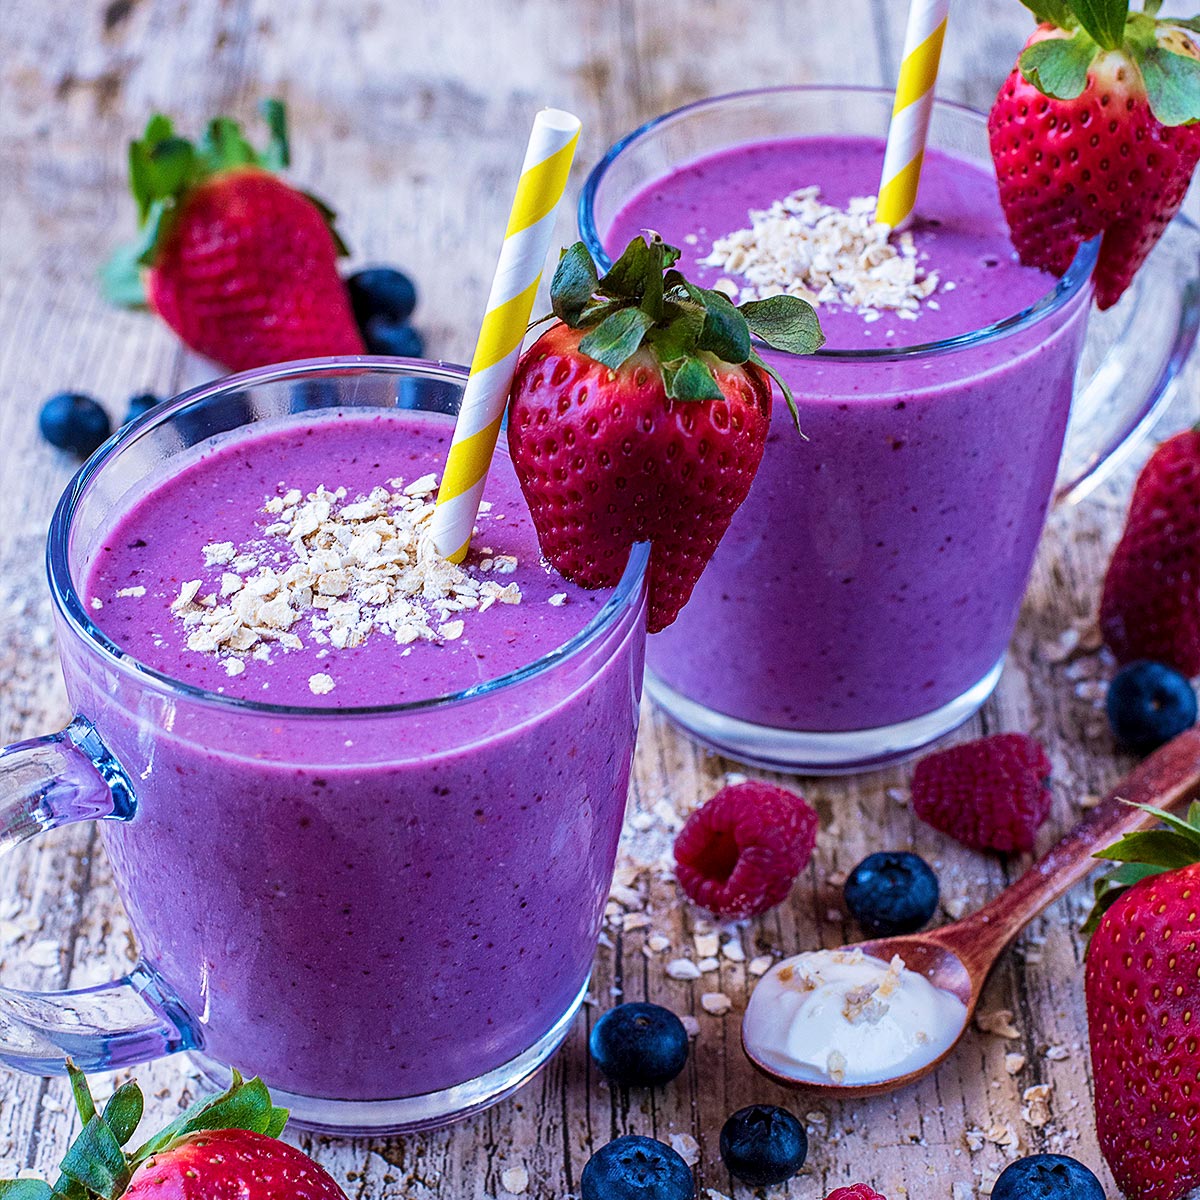 https://hungryhealthyhappy.com/wp-content/uploads/2019/05/Triple-Berry-Oat-Smoothie-featured-b.jpg